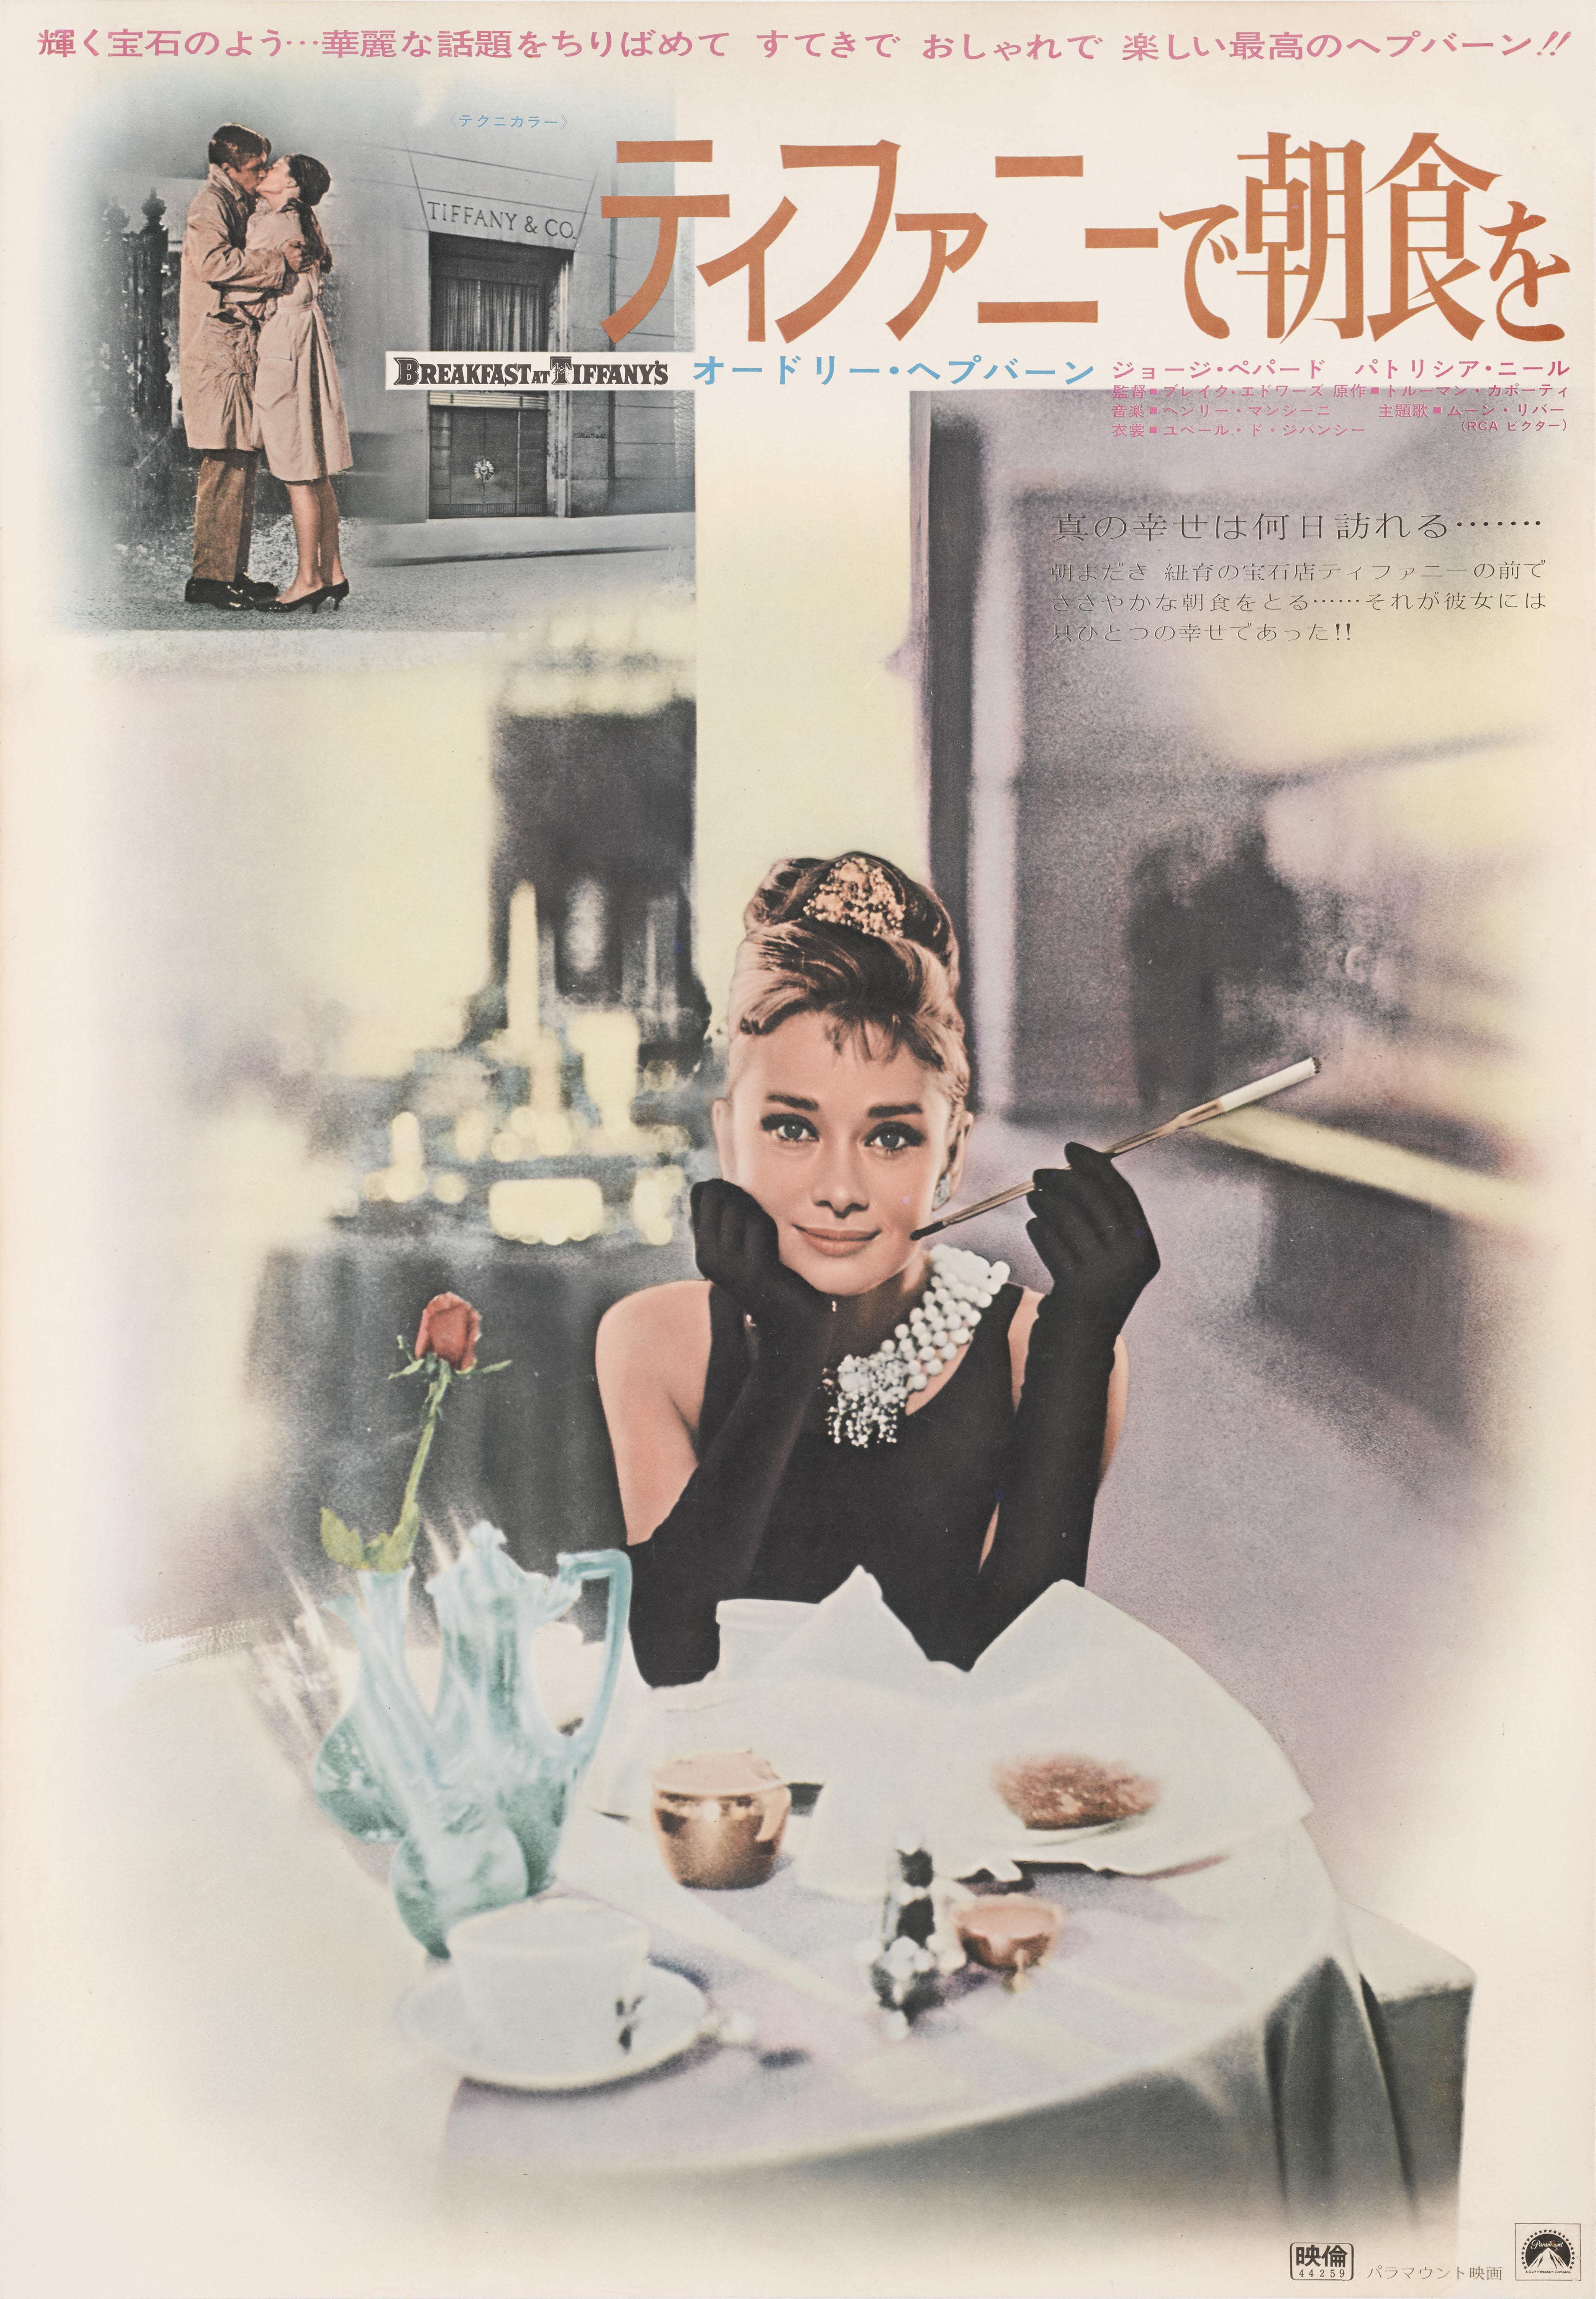 Original Japanese film poster for Audrey Hepburn's Classic 1961 film directed by Blake Edwards and starring Audrey Hepburn and George Peppard. This gorgeous poster was only used for the films 1969 re-release in Japan. This poster is unfolded and